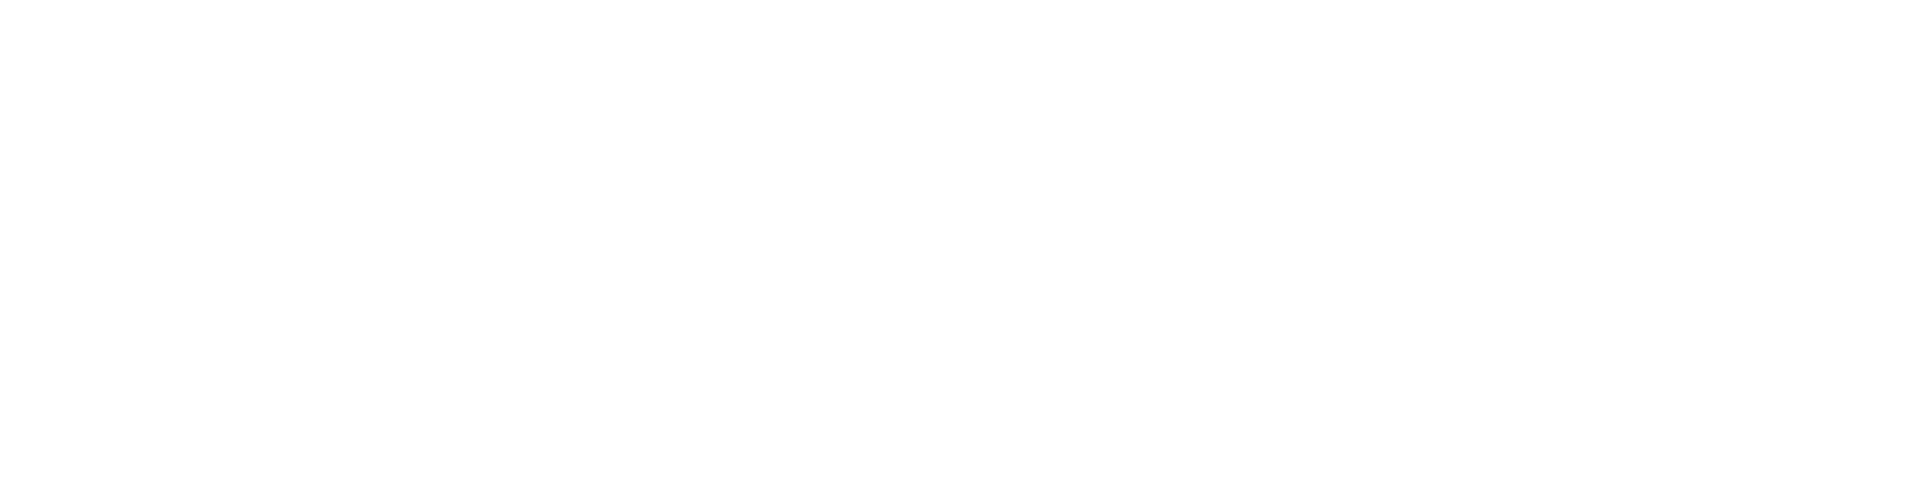 The Scuffed Series 18 - Escape by Matching